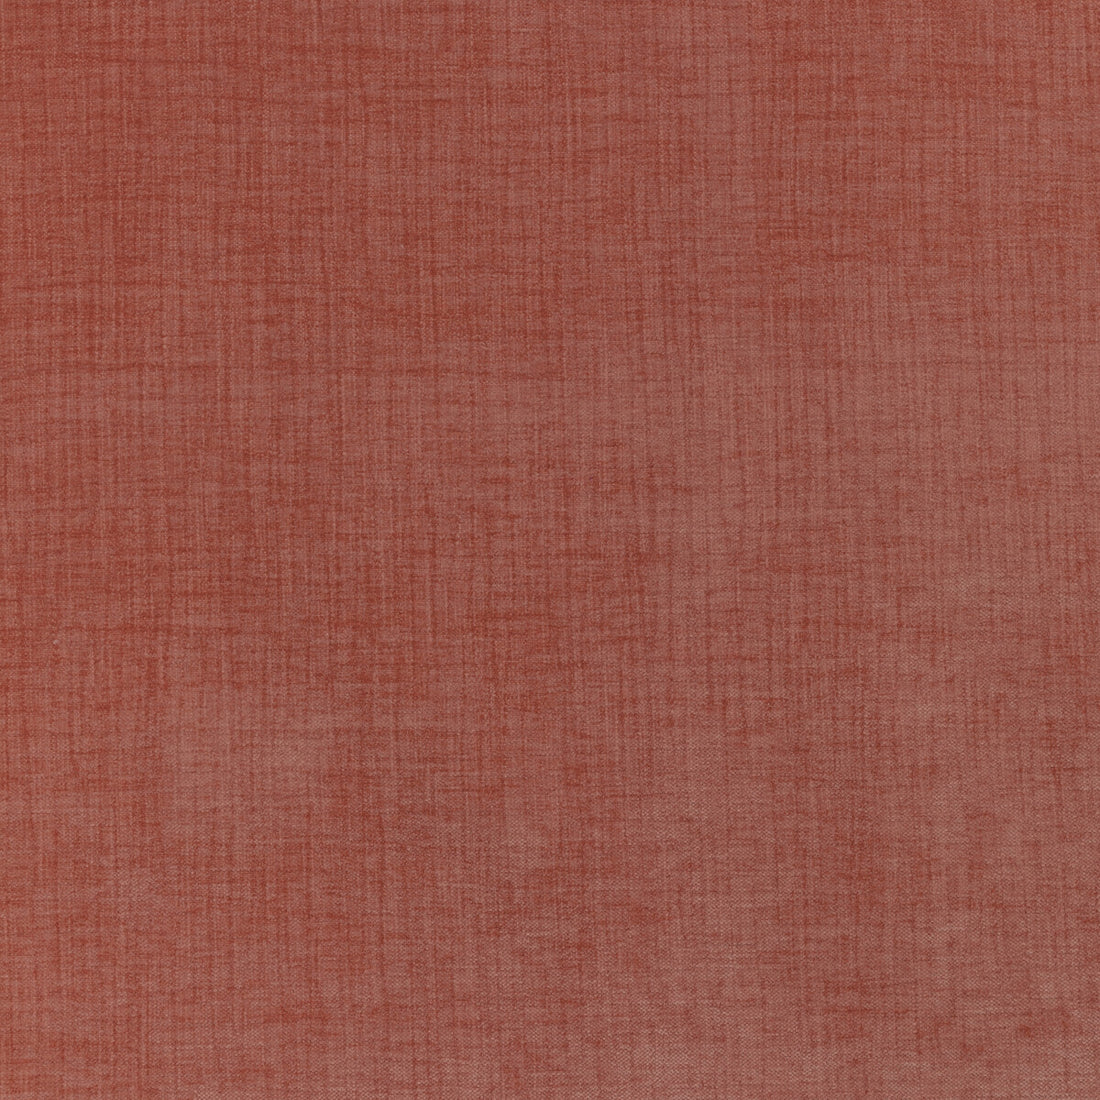 Accommodate fabric in guava color - pattern 36255.212.0 - by Kravet Contract in the Supreen collection